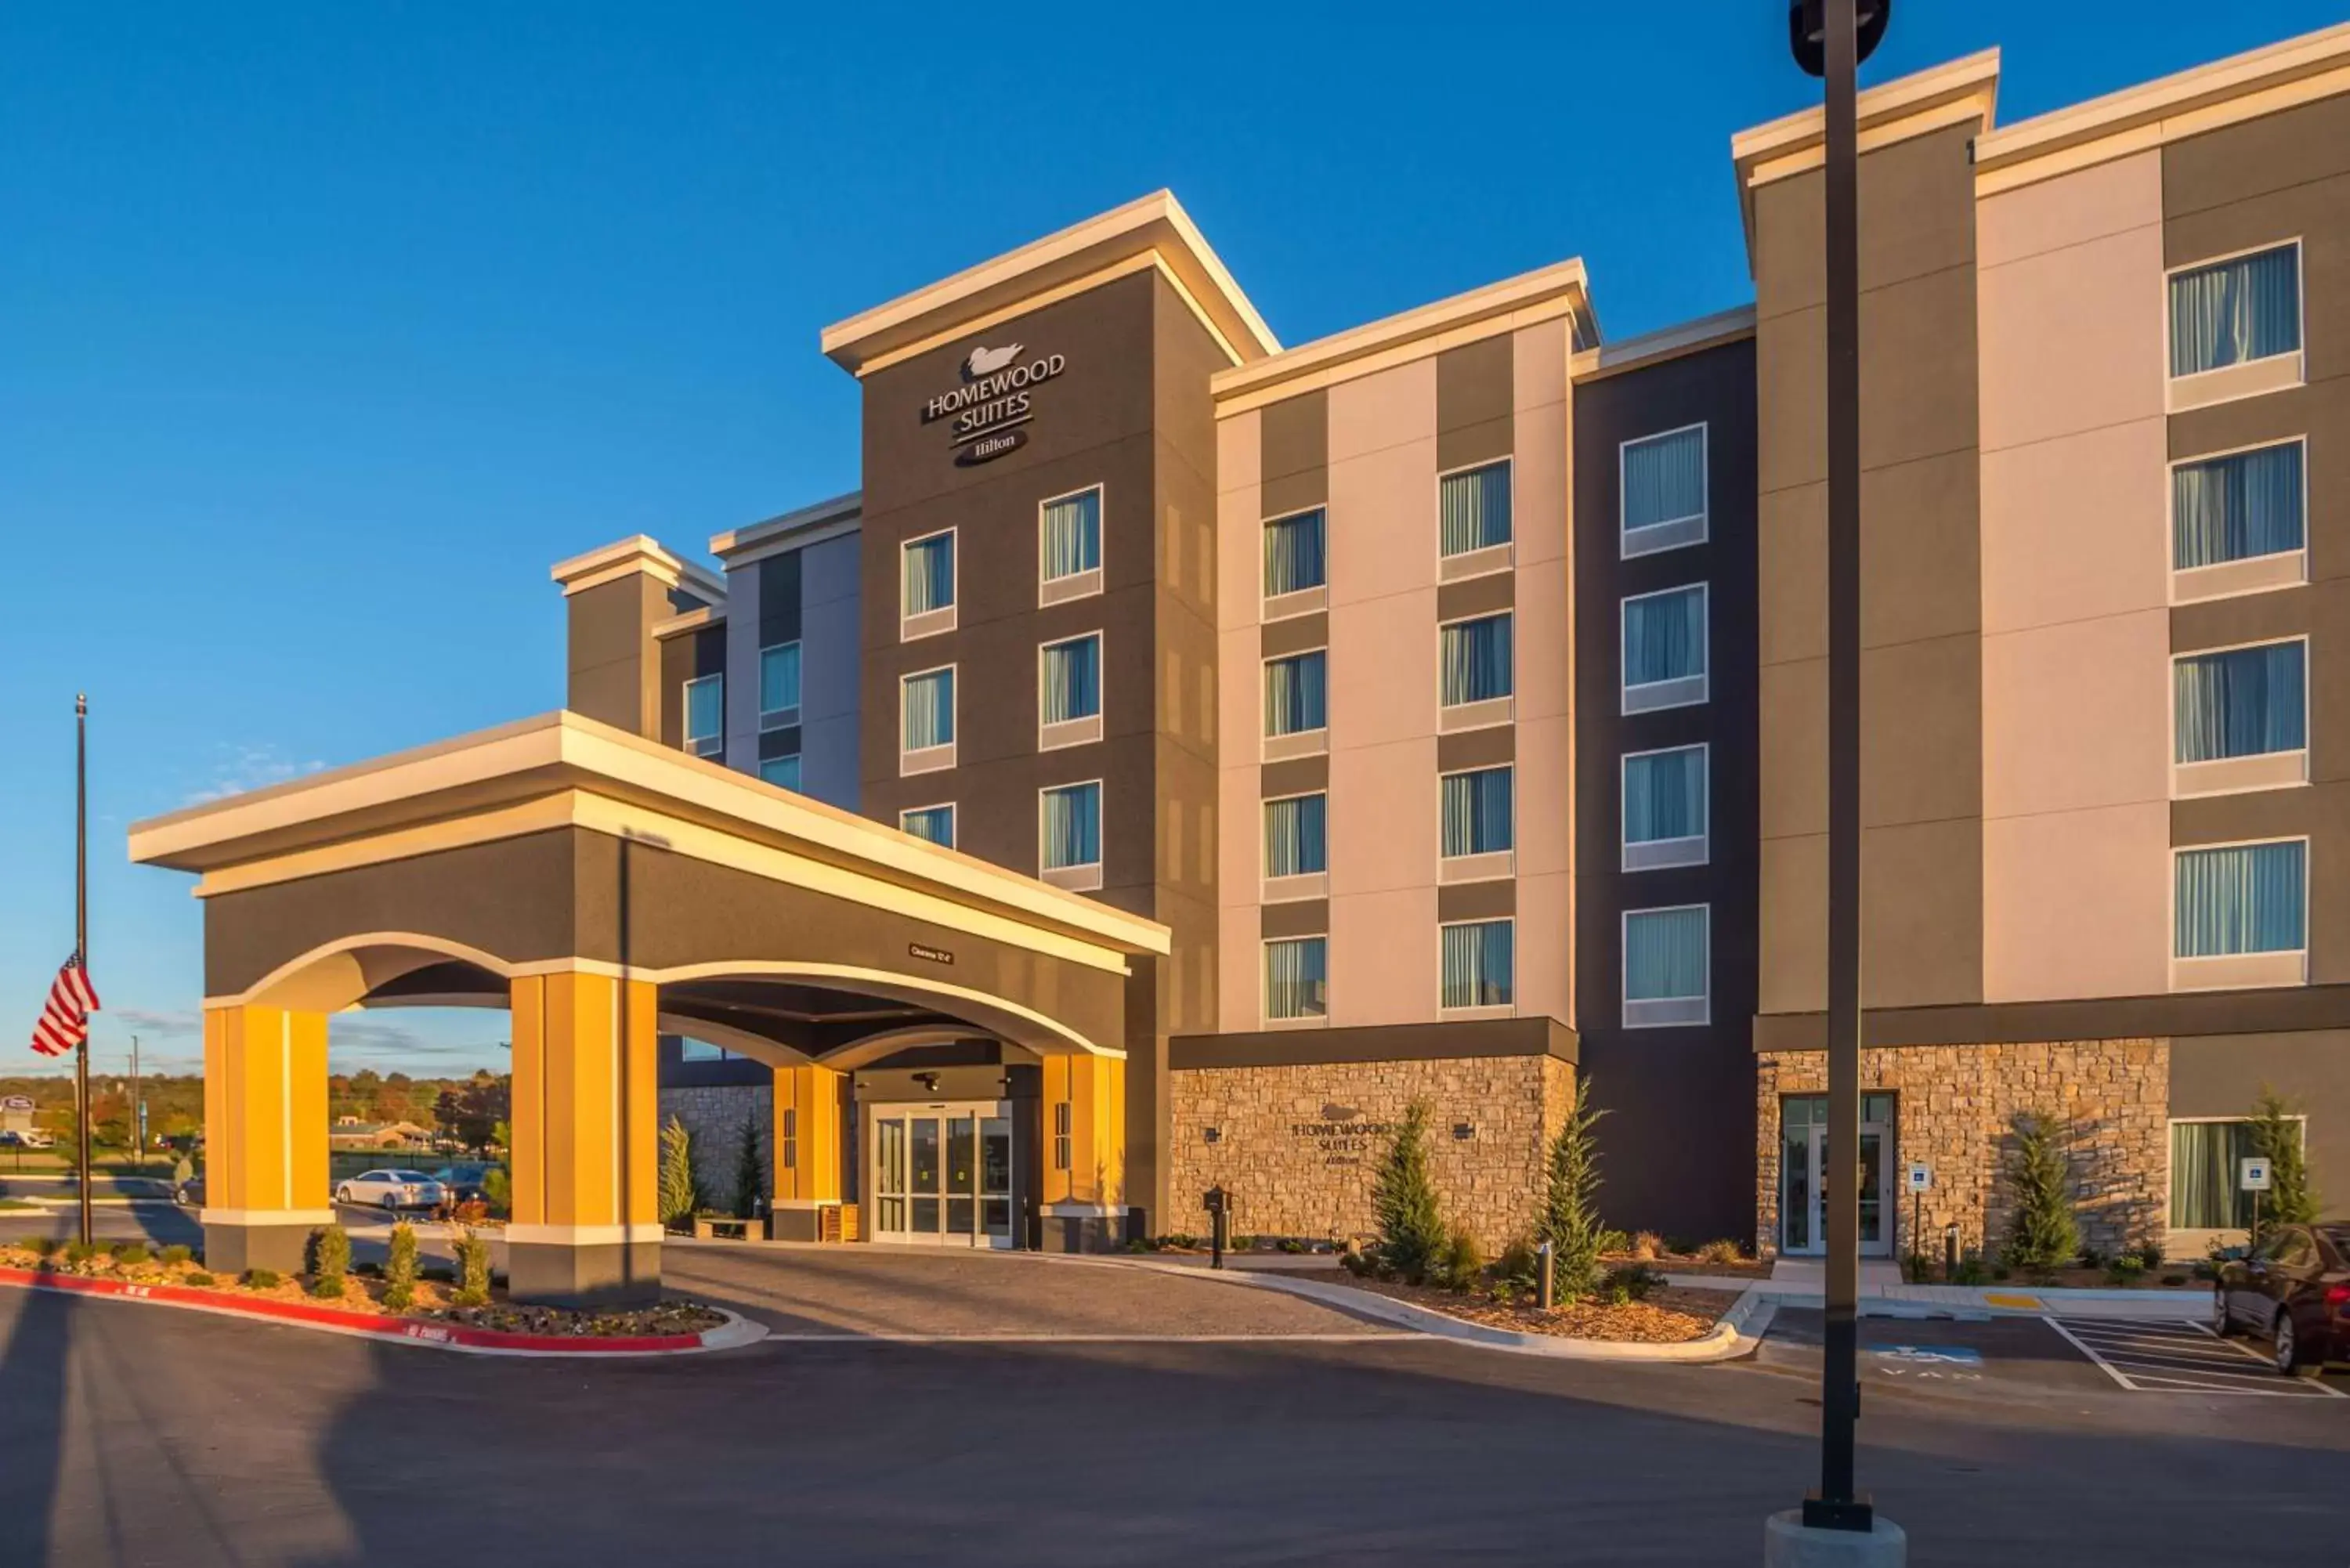 Property Building in Homewood Suites By Hilton Tulsa Catoosa